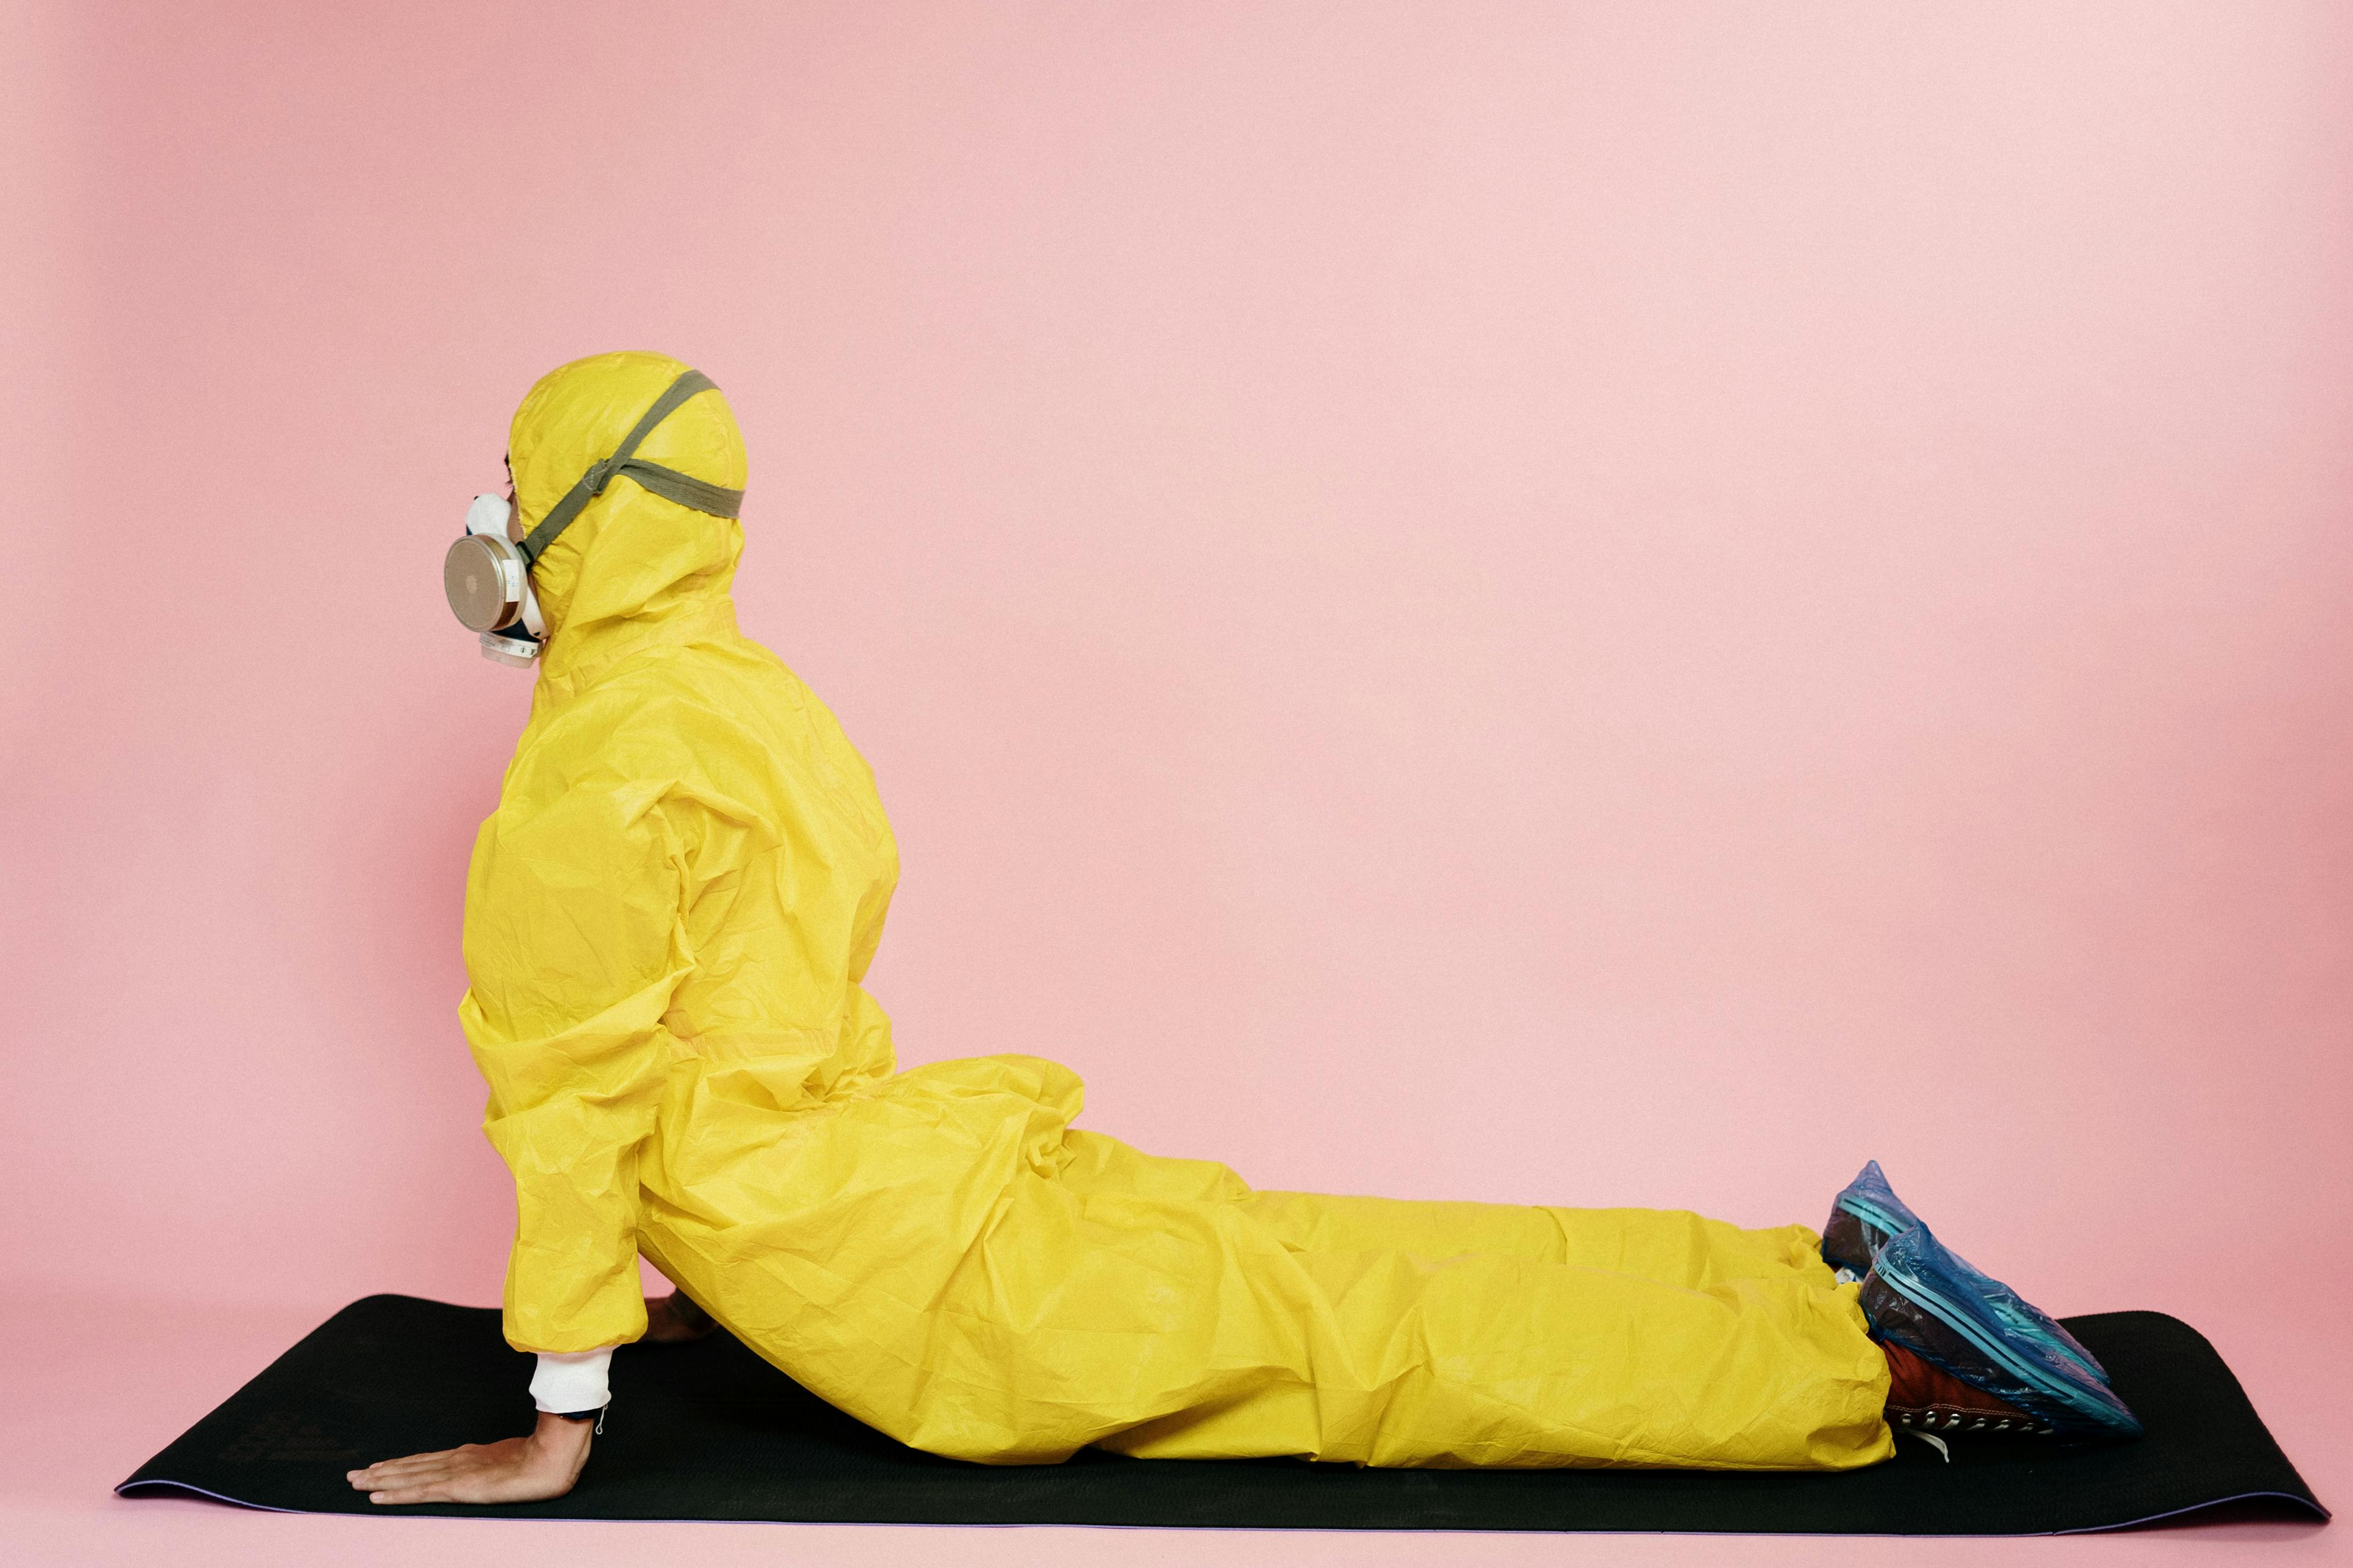 man-in-yellow-protective-suit-stretching-3951375